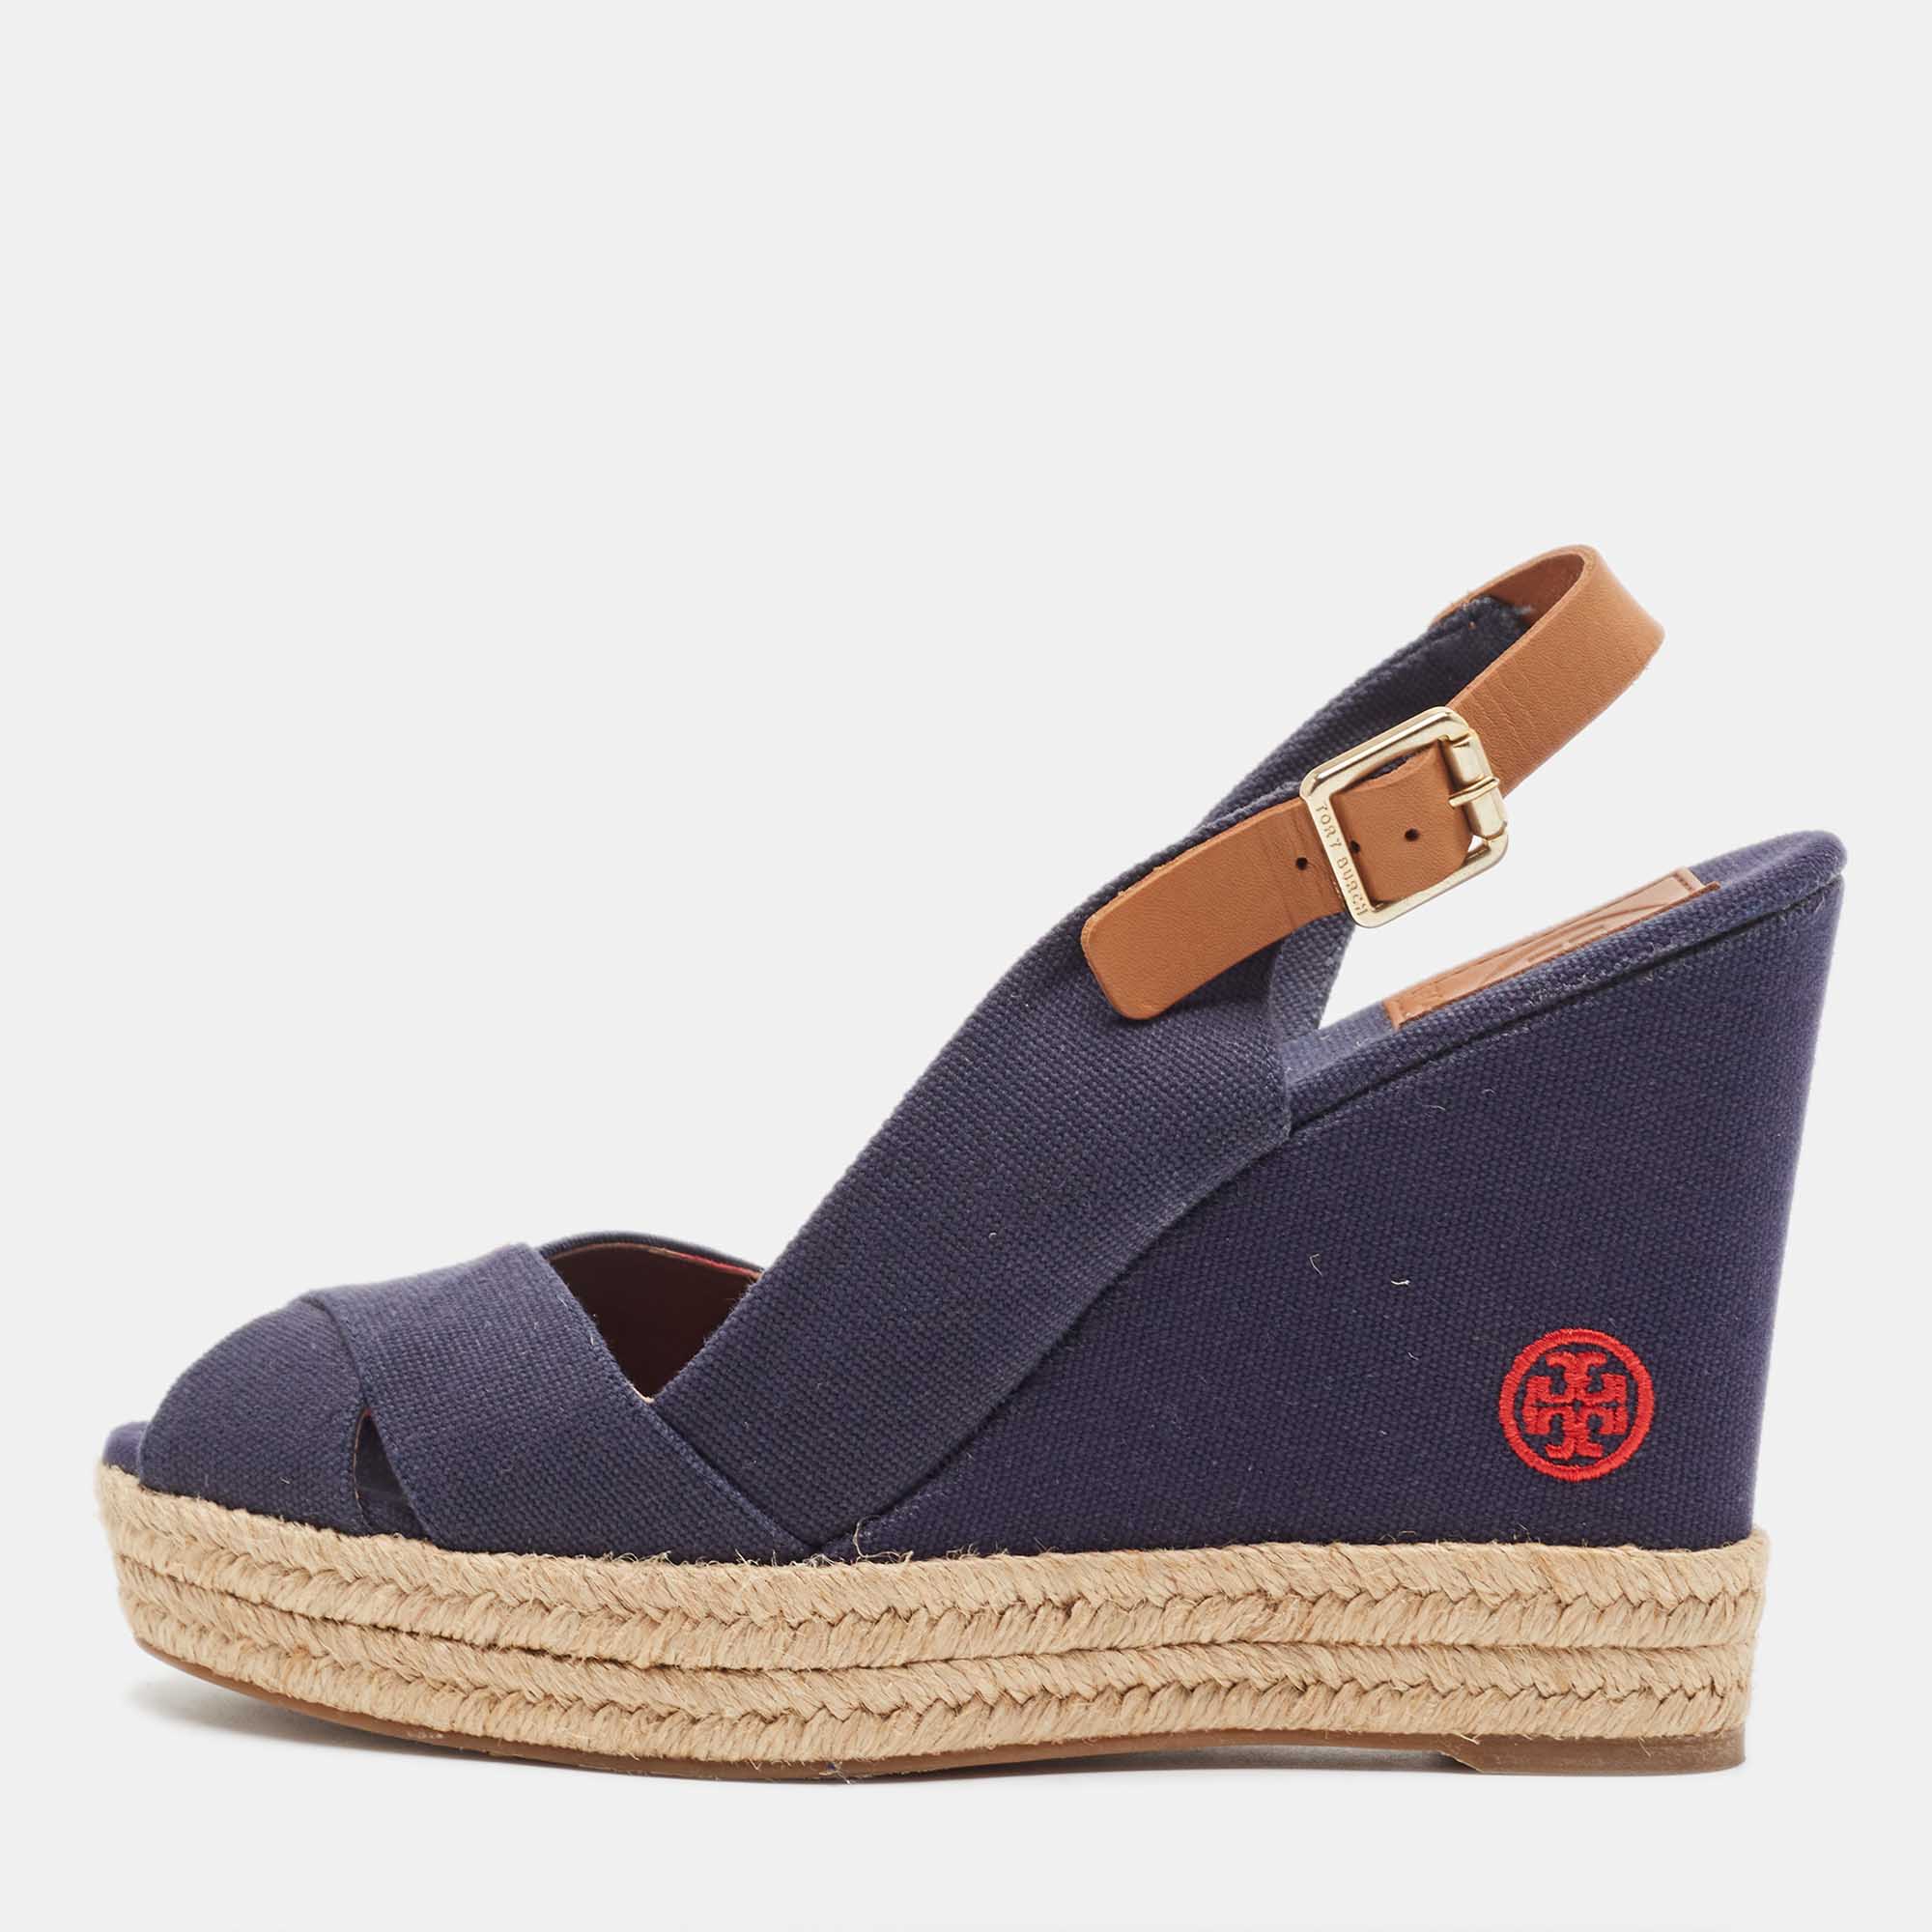 Pre-owned Tory Burch Navy Blue Denim Espadrille Wedge Sandals Size 38.5